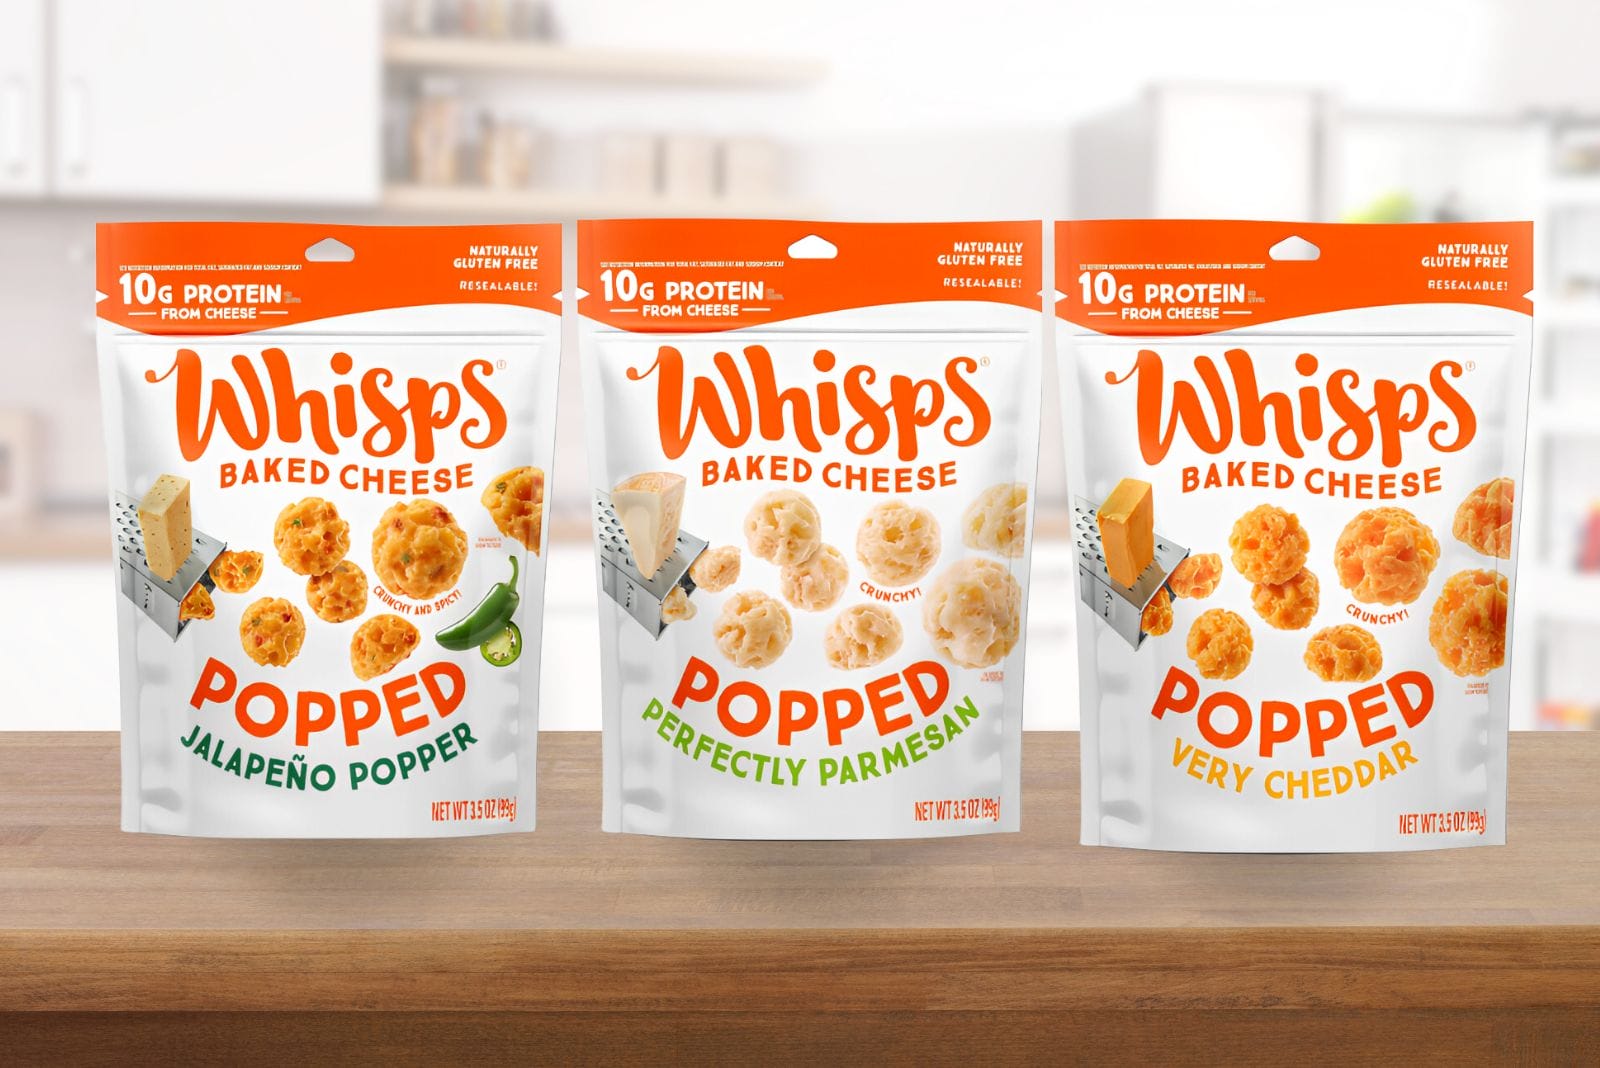 Three packages of Whisps' new baked Popped Chips, in Jalapeno Popper, Perfectly Parmesan and Very Cheddar flavors, sit on a kitchen counter